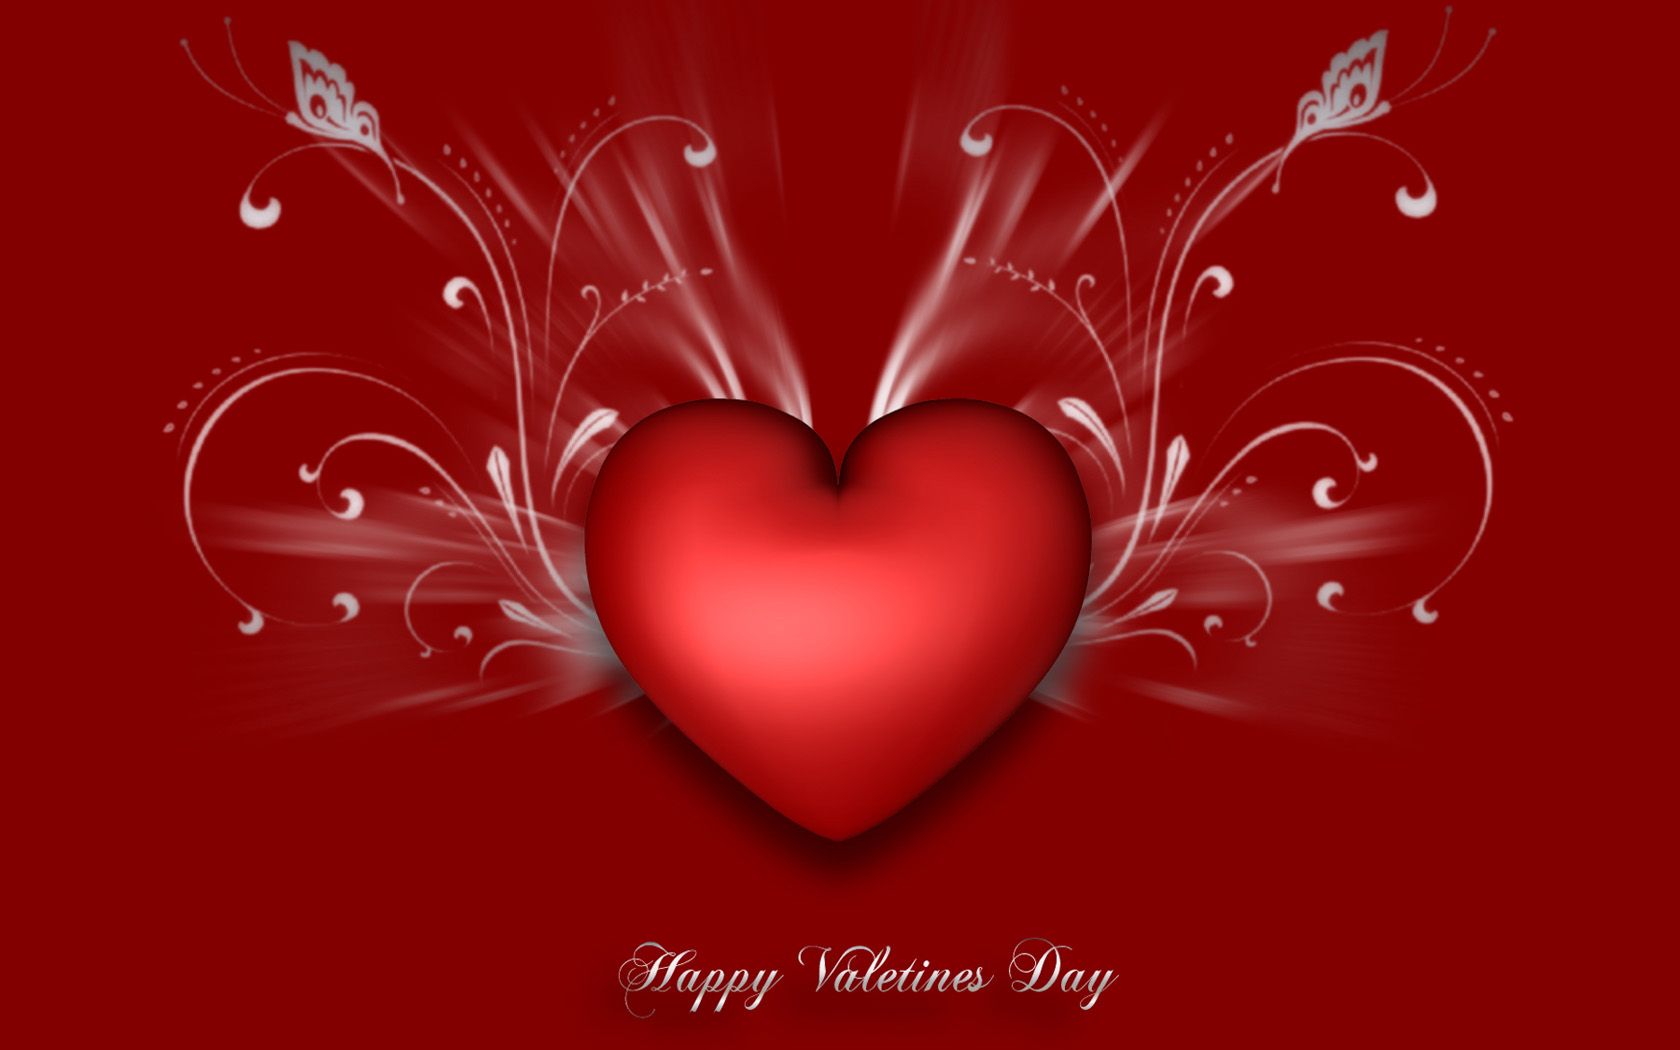 Happy Valentines Day Wallpapers HD 2016 Wallpapers, Backgrounds